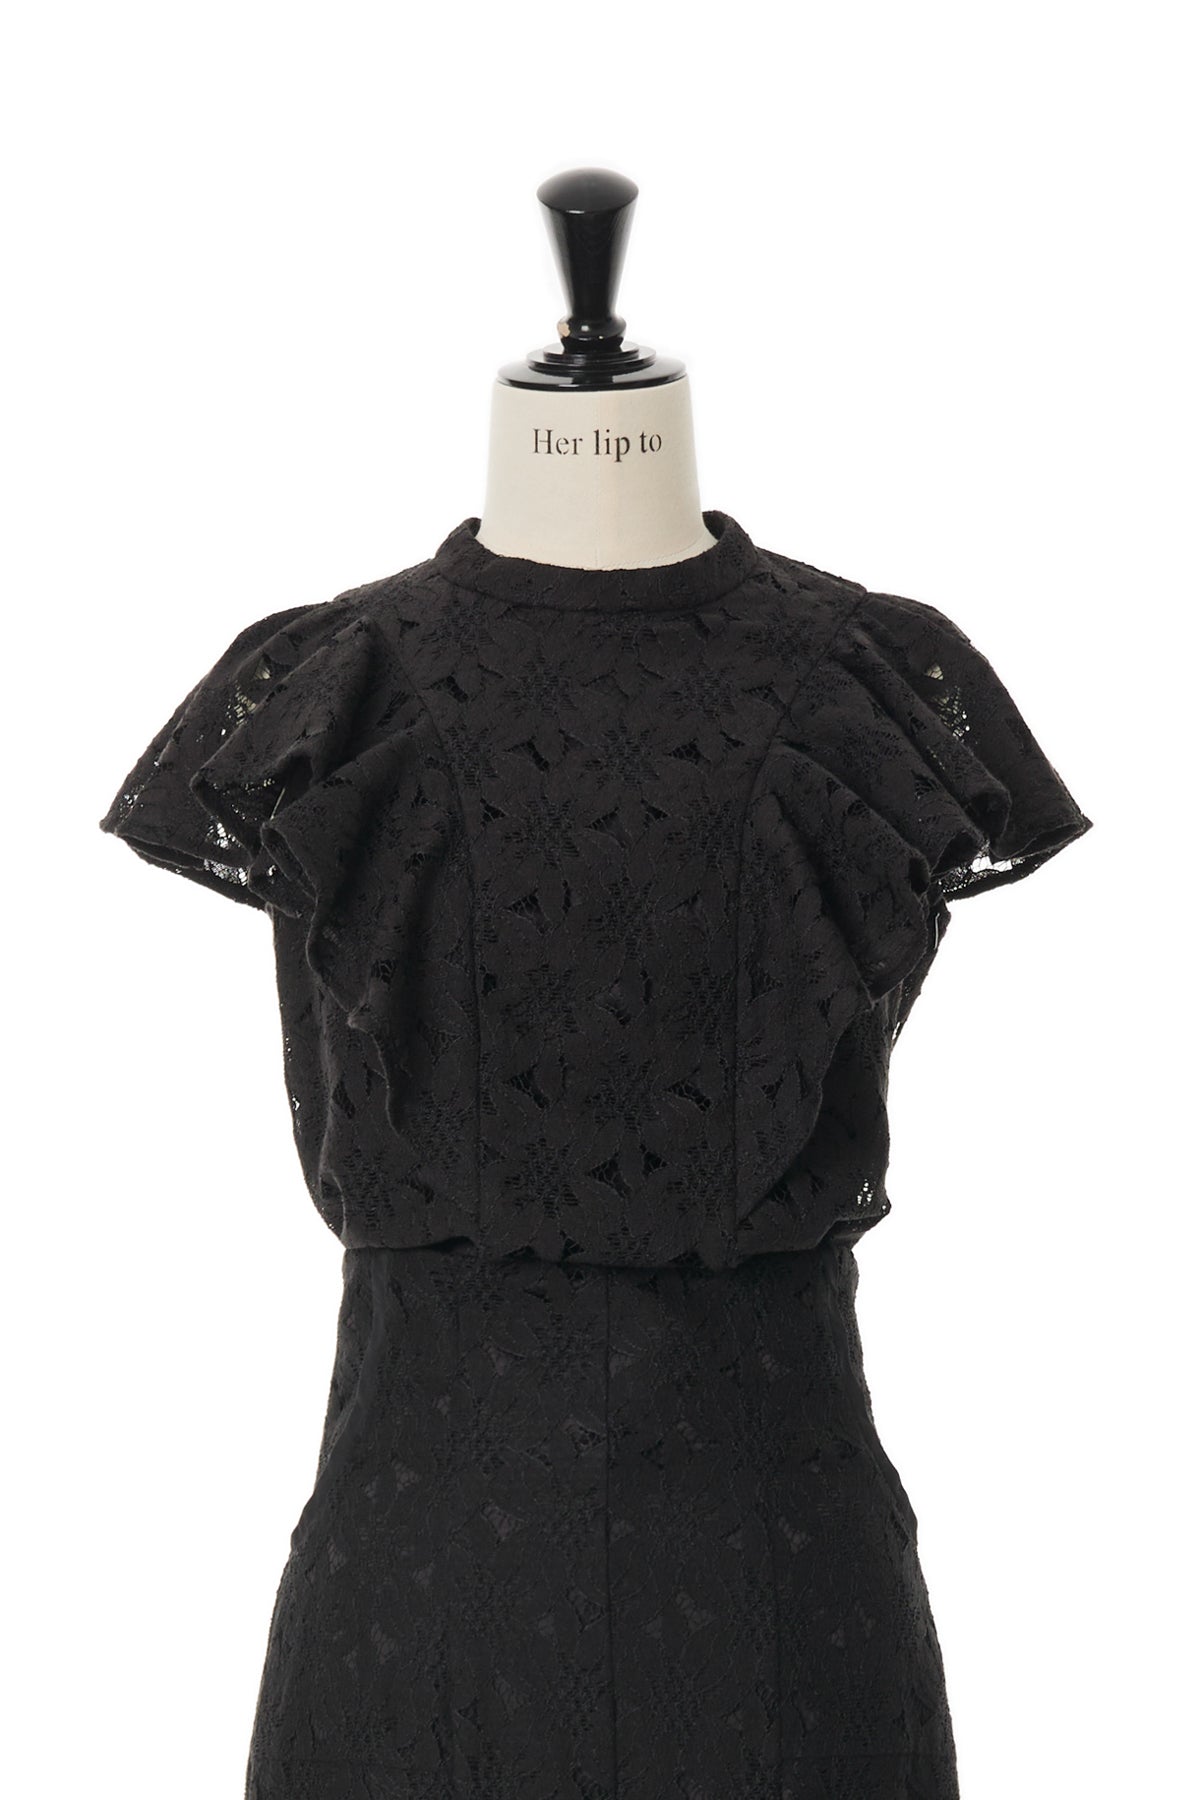 Floral Lace Ruffled Top